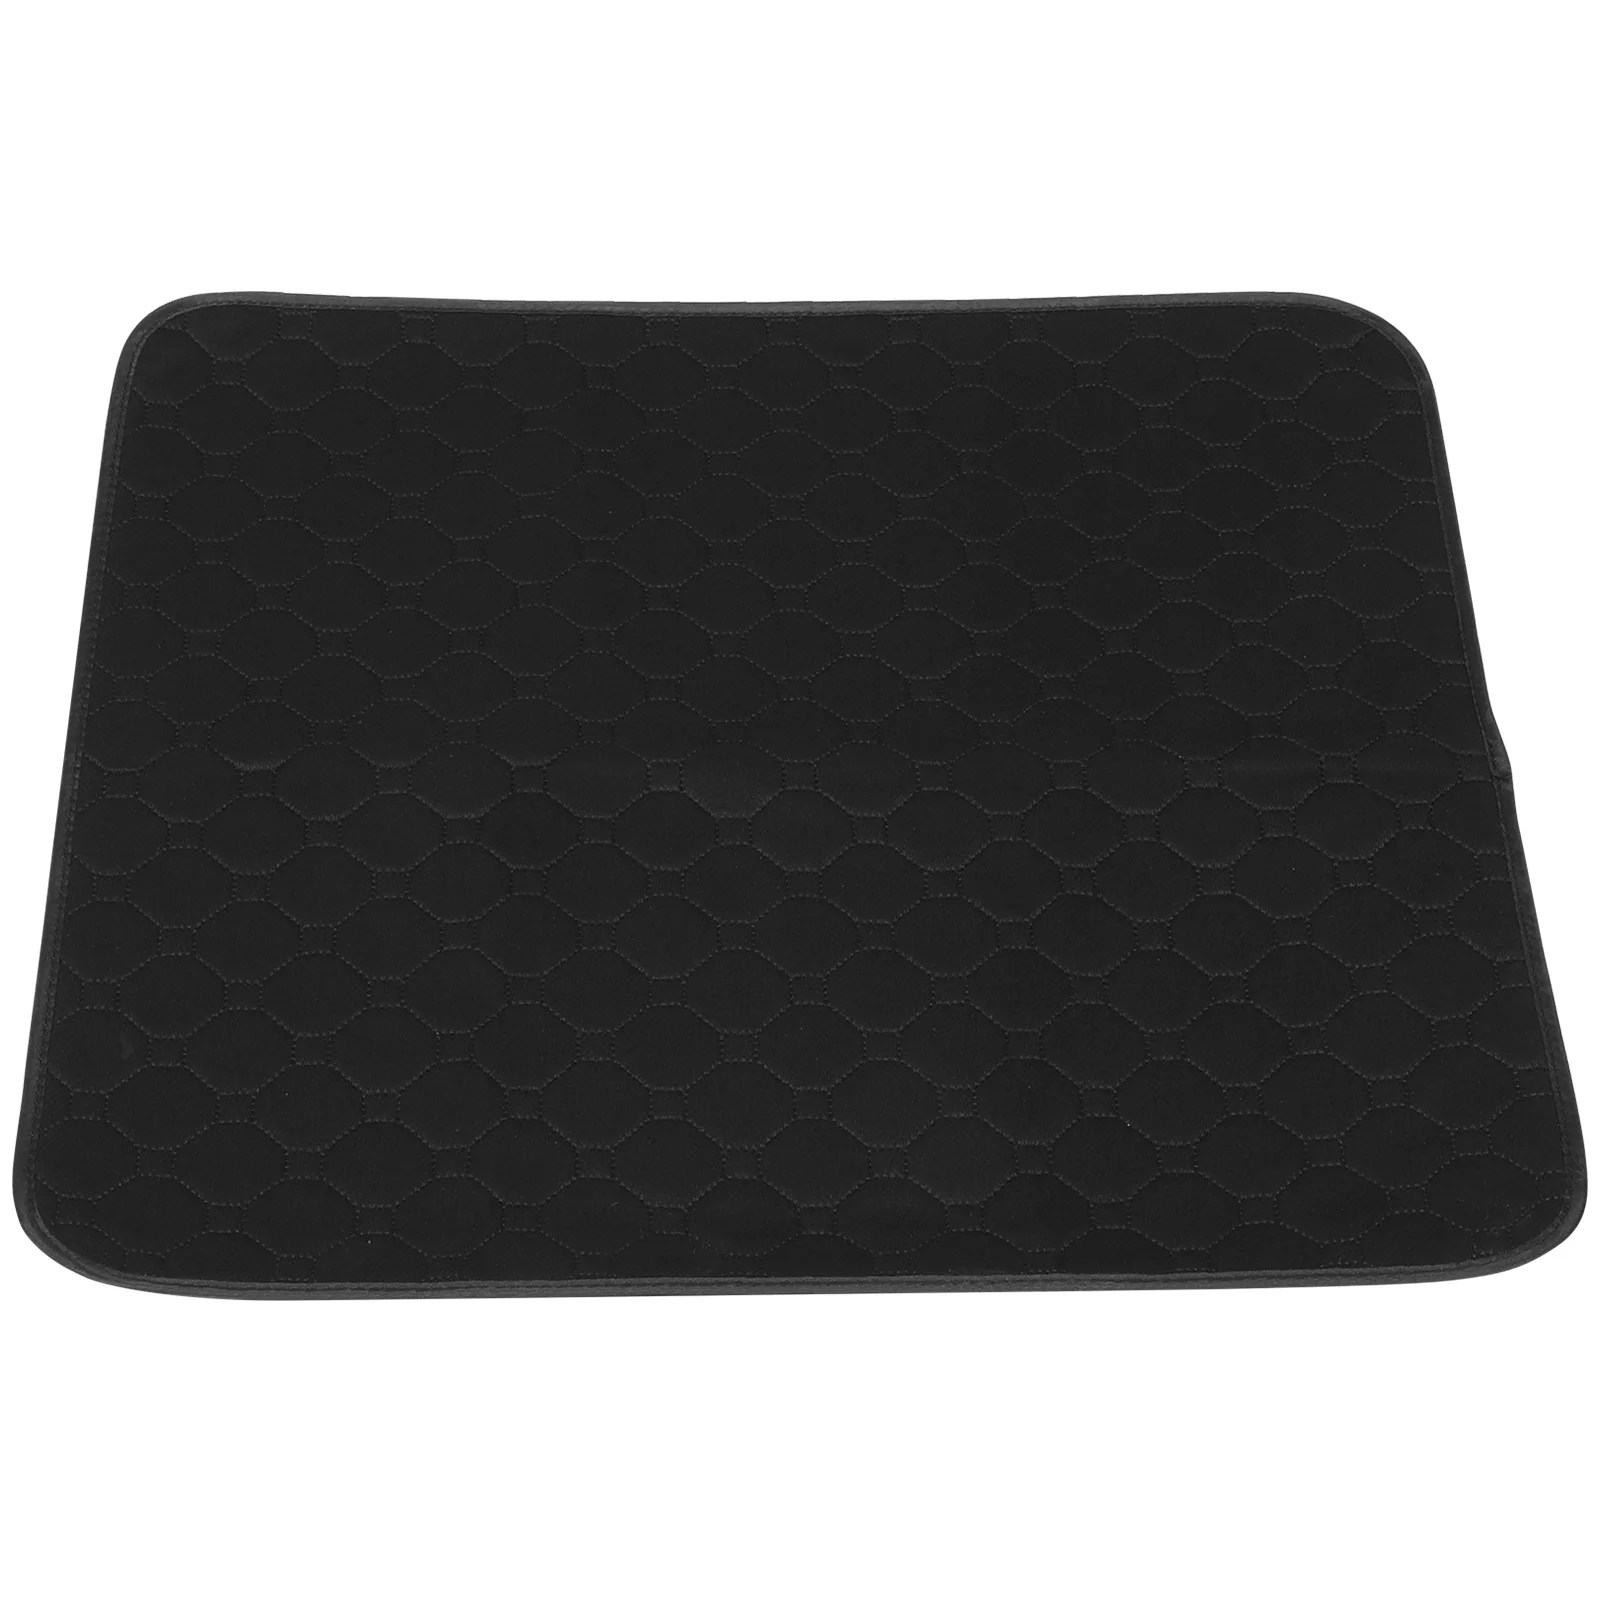 

Pad Car Absorbent Cover Chair Pads Cushion Square Non Thin Waterproof Mat Incontinence Office Absorbing Pee Nonslip Home Seats